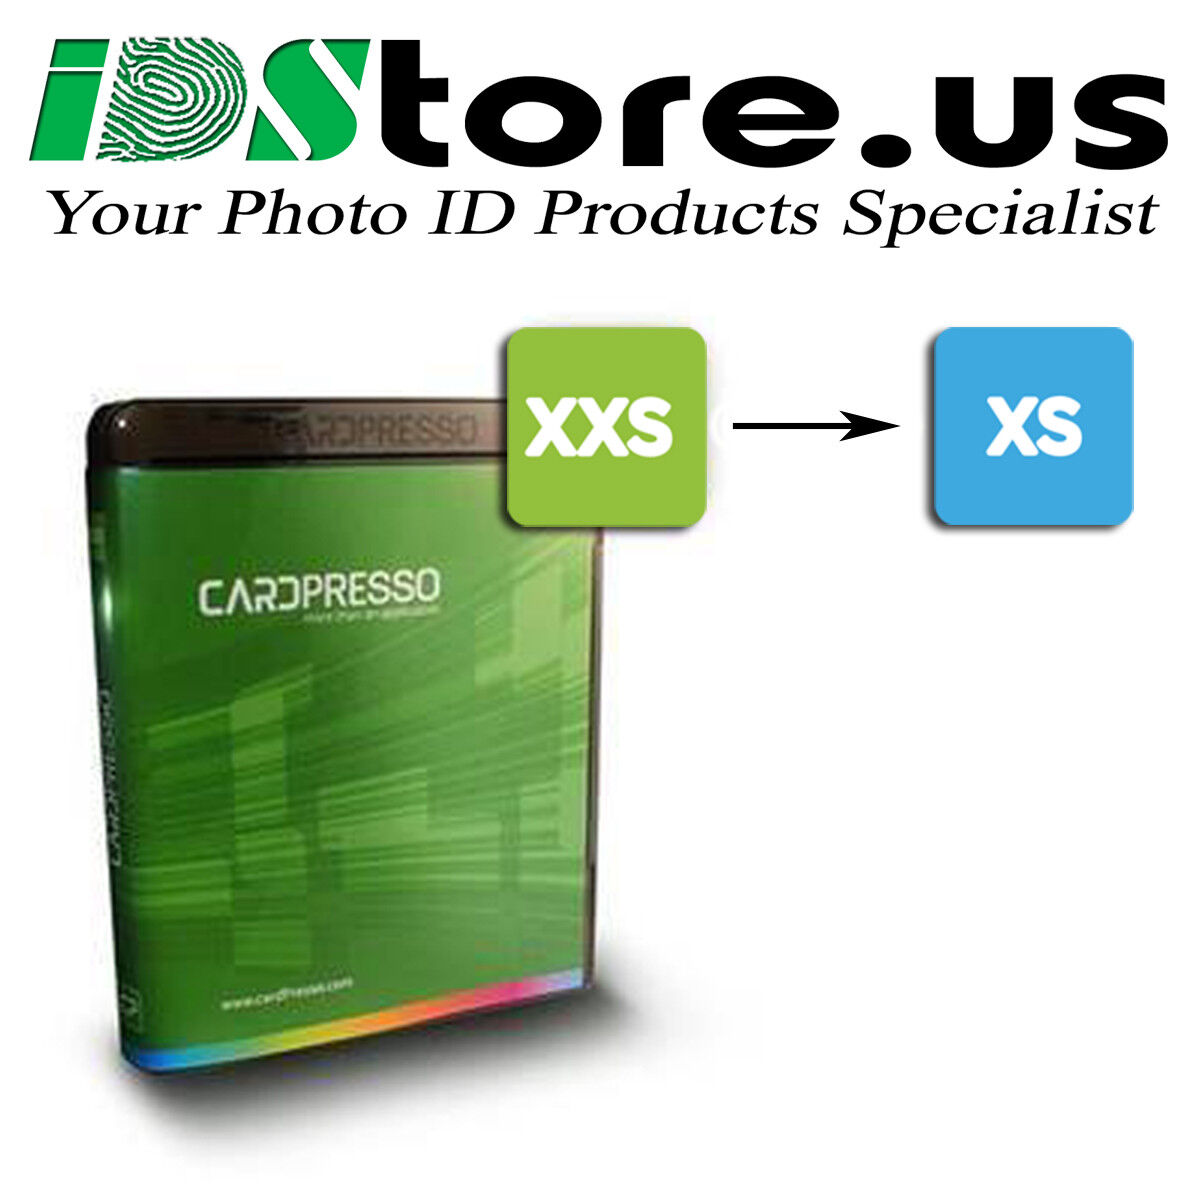 CardPresso XXS Edition Software Upgrade to XS or XM Editions (All Regions) 